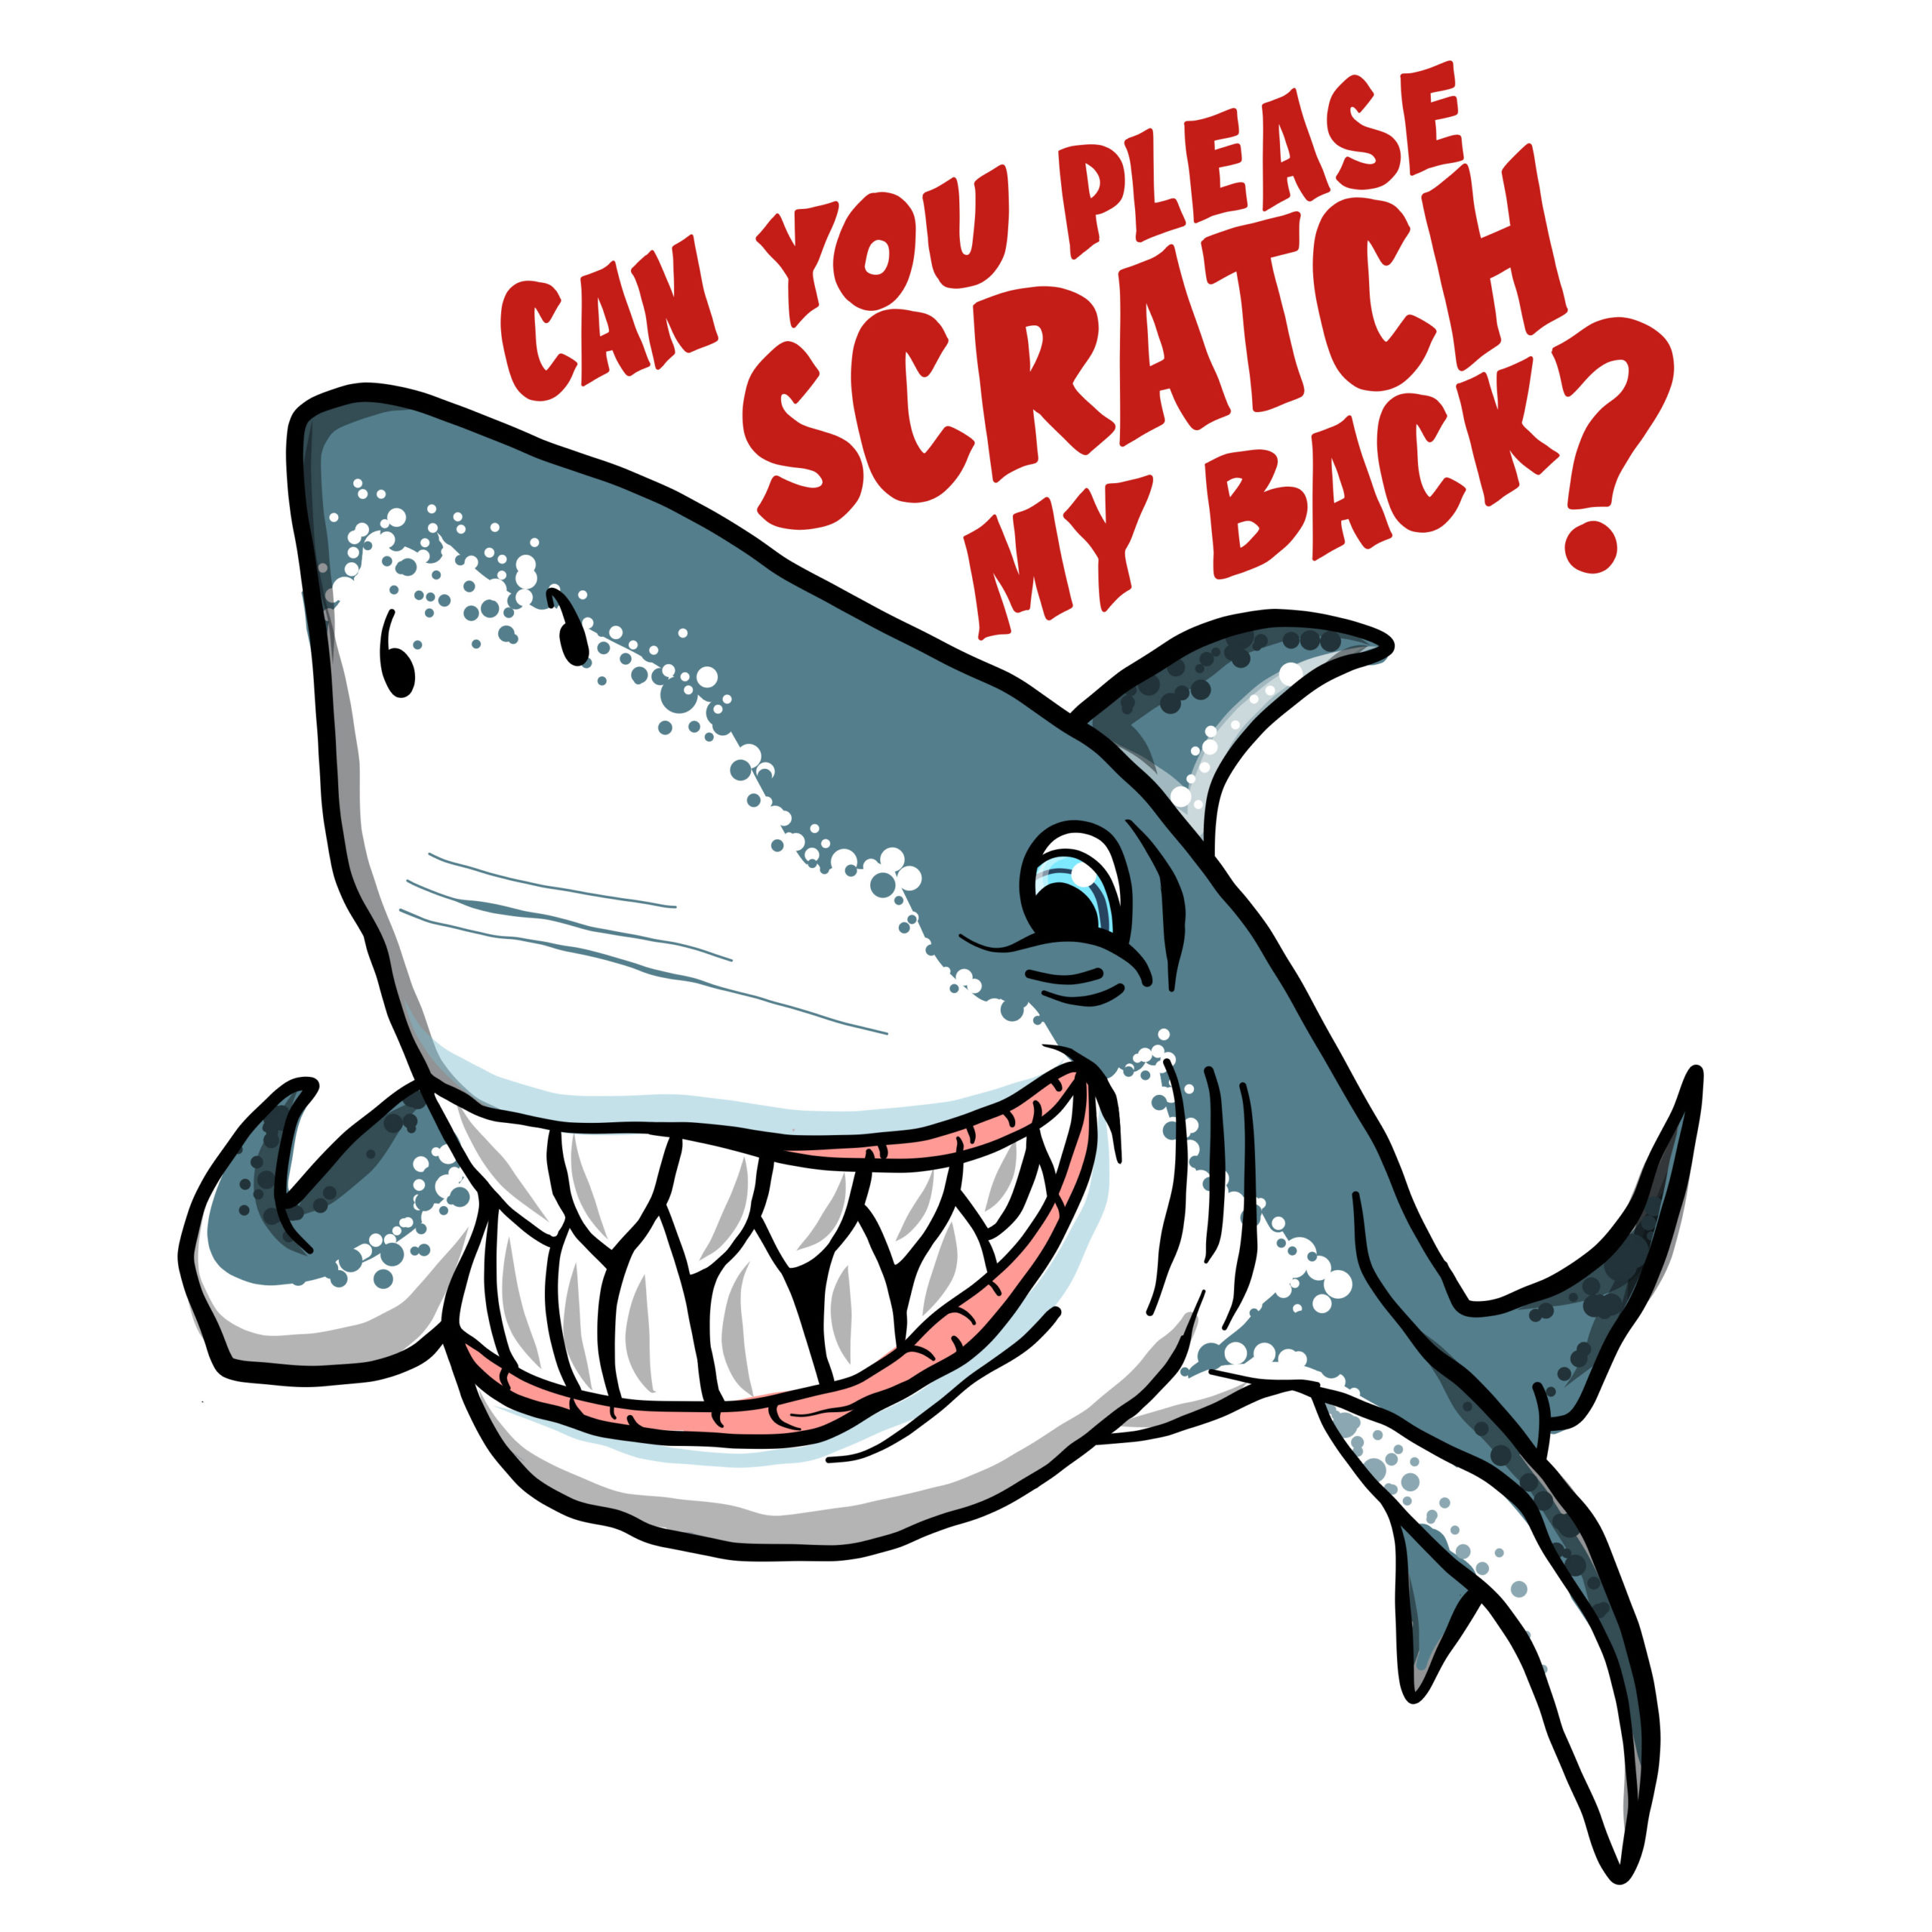 Shark - Can you Please Scratch my Back? - Dive Shirts